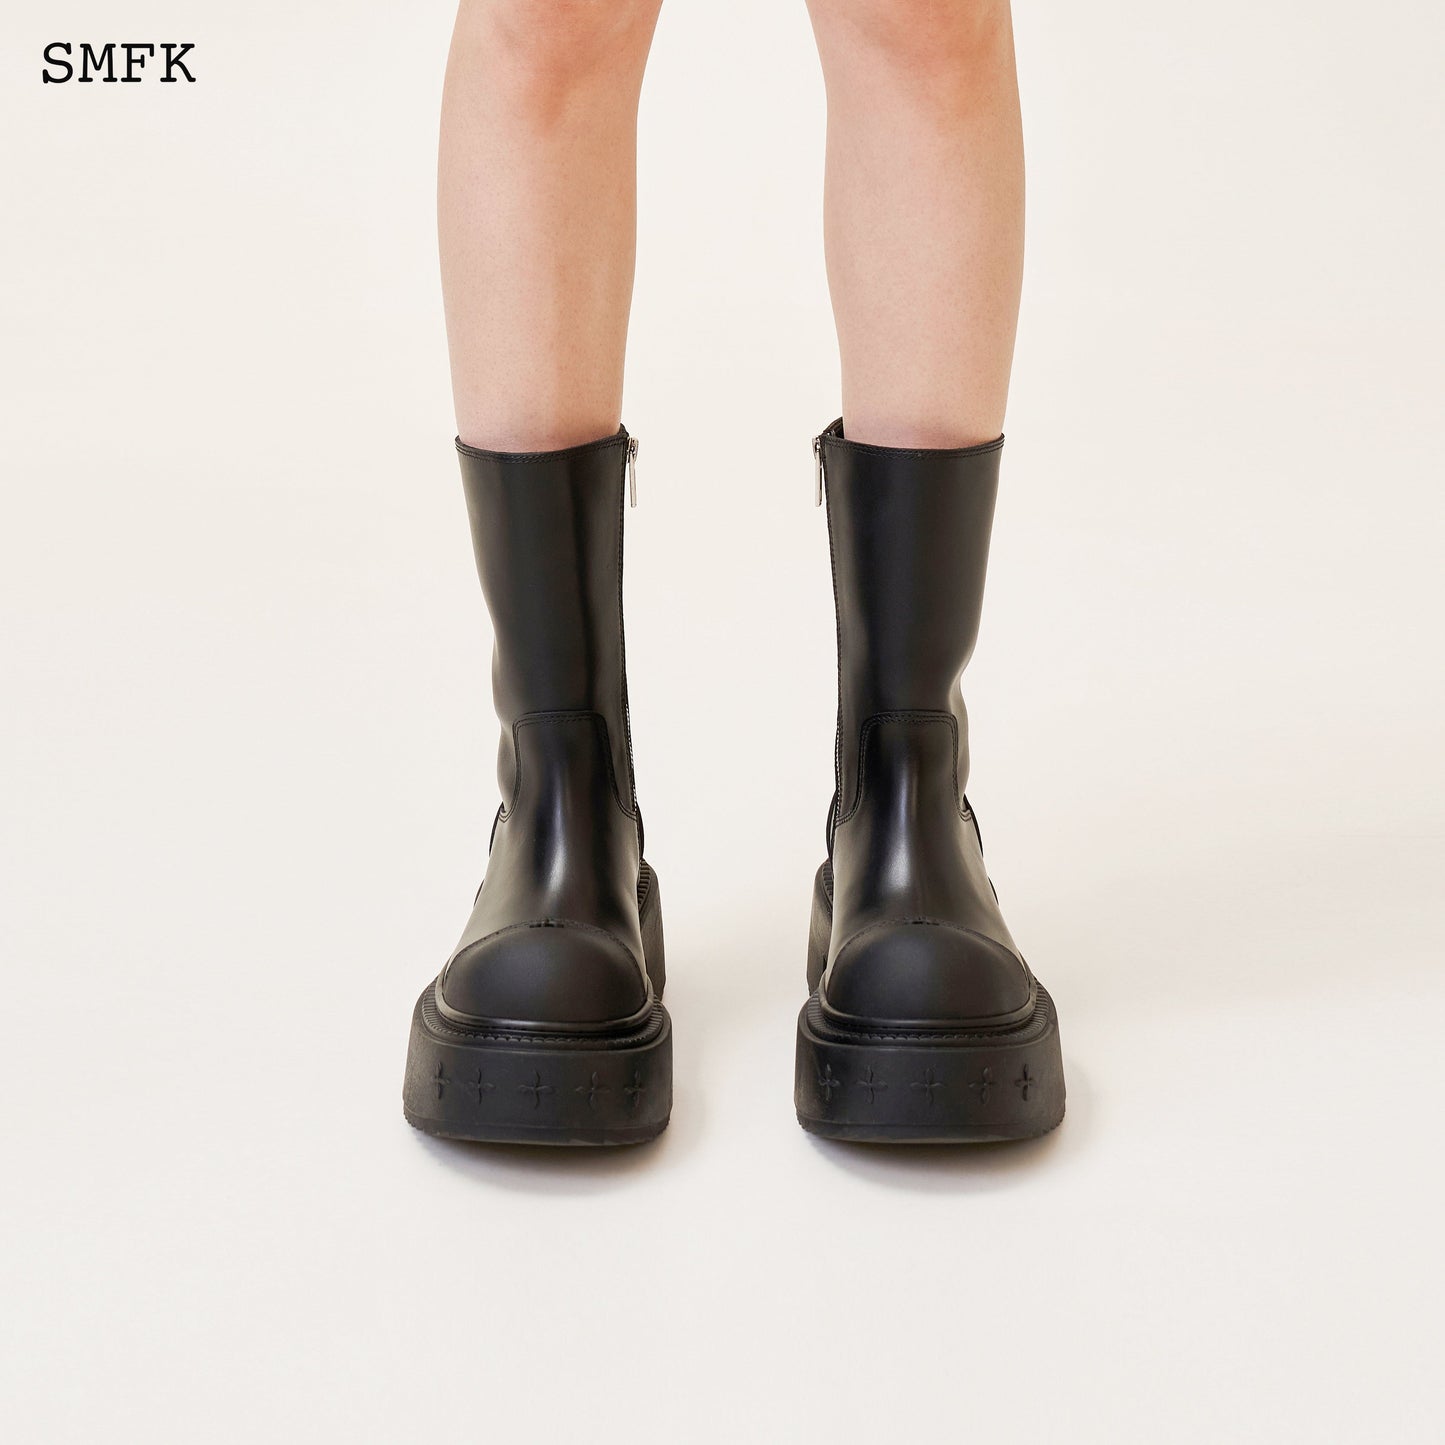 SMFK Compass Rider Low Boots In Black